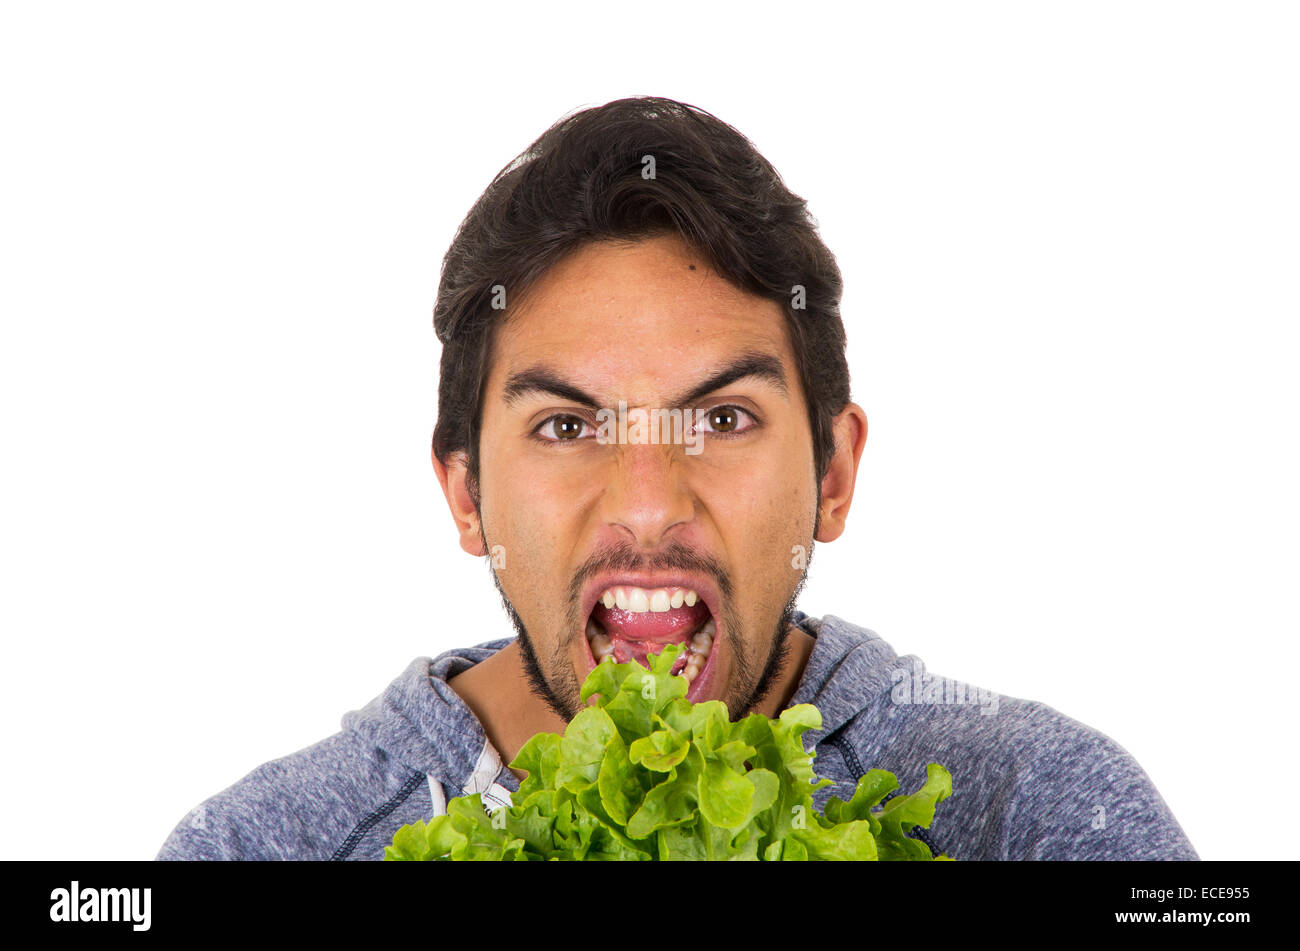 closeup portrait of handsome young man holding fresh lettuce leaves with mouth open Stock Photo